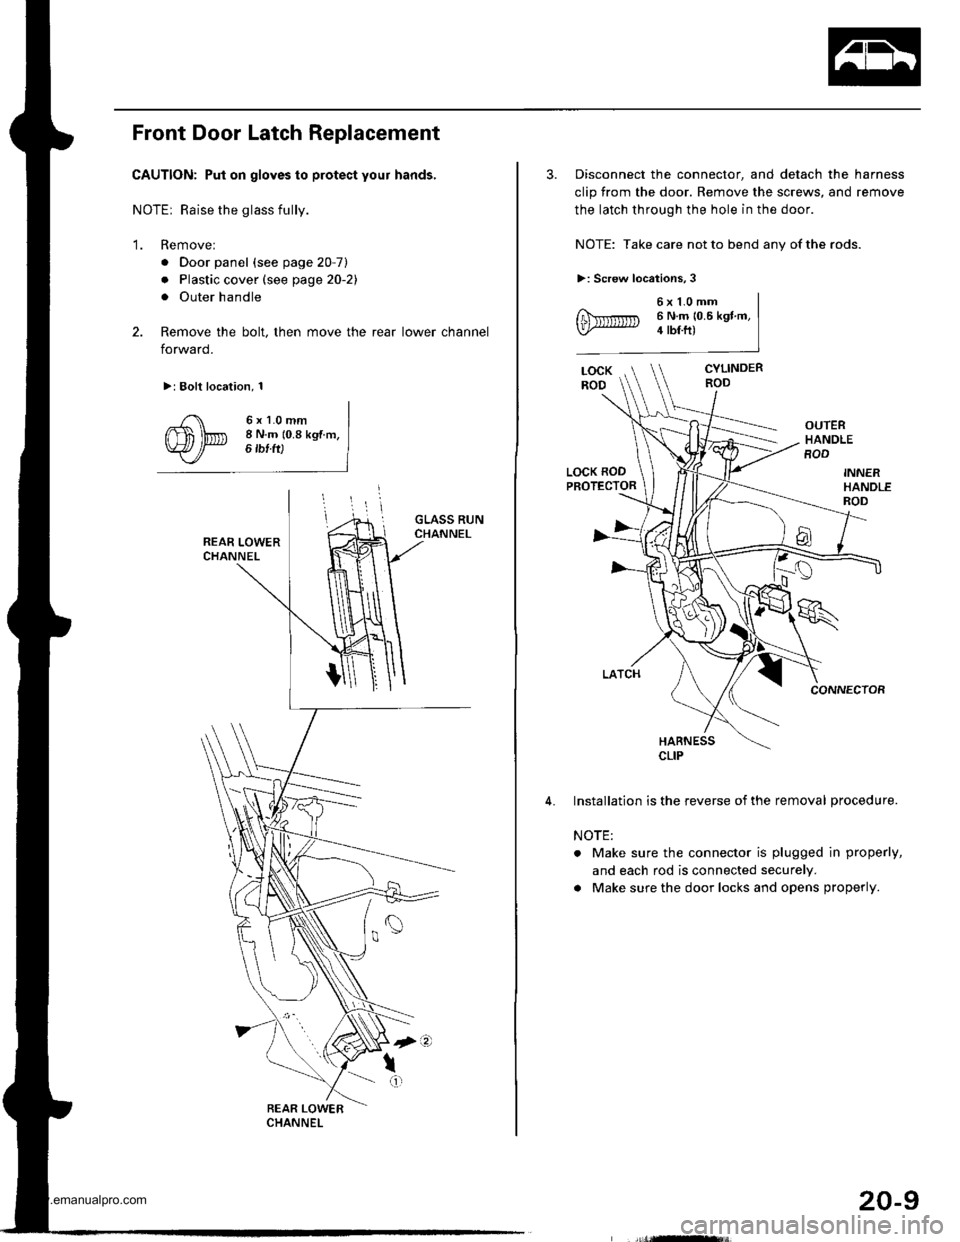 HONDA CR-V 2000 RD1-RD3 / 1.G Workshop Manual 
Front Door Latch Replacement
CAUTION: Put on gloves to protect your hands,
NOTEr Raise the glass fully.
1. Remove:
. Door panel (see page 20-7)
. Plastic cover (see page 20-21
. Outer handle
2. Remo